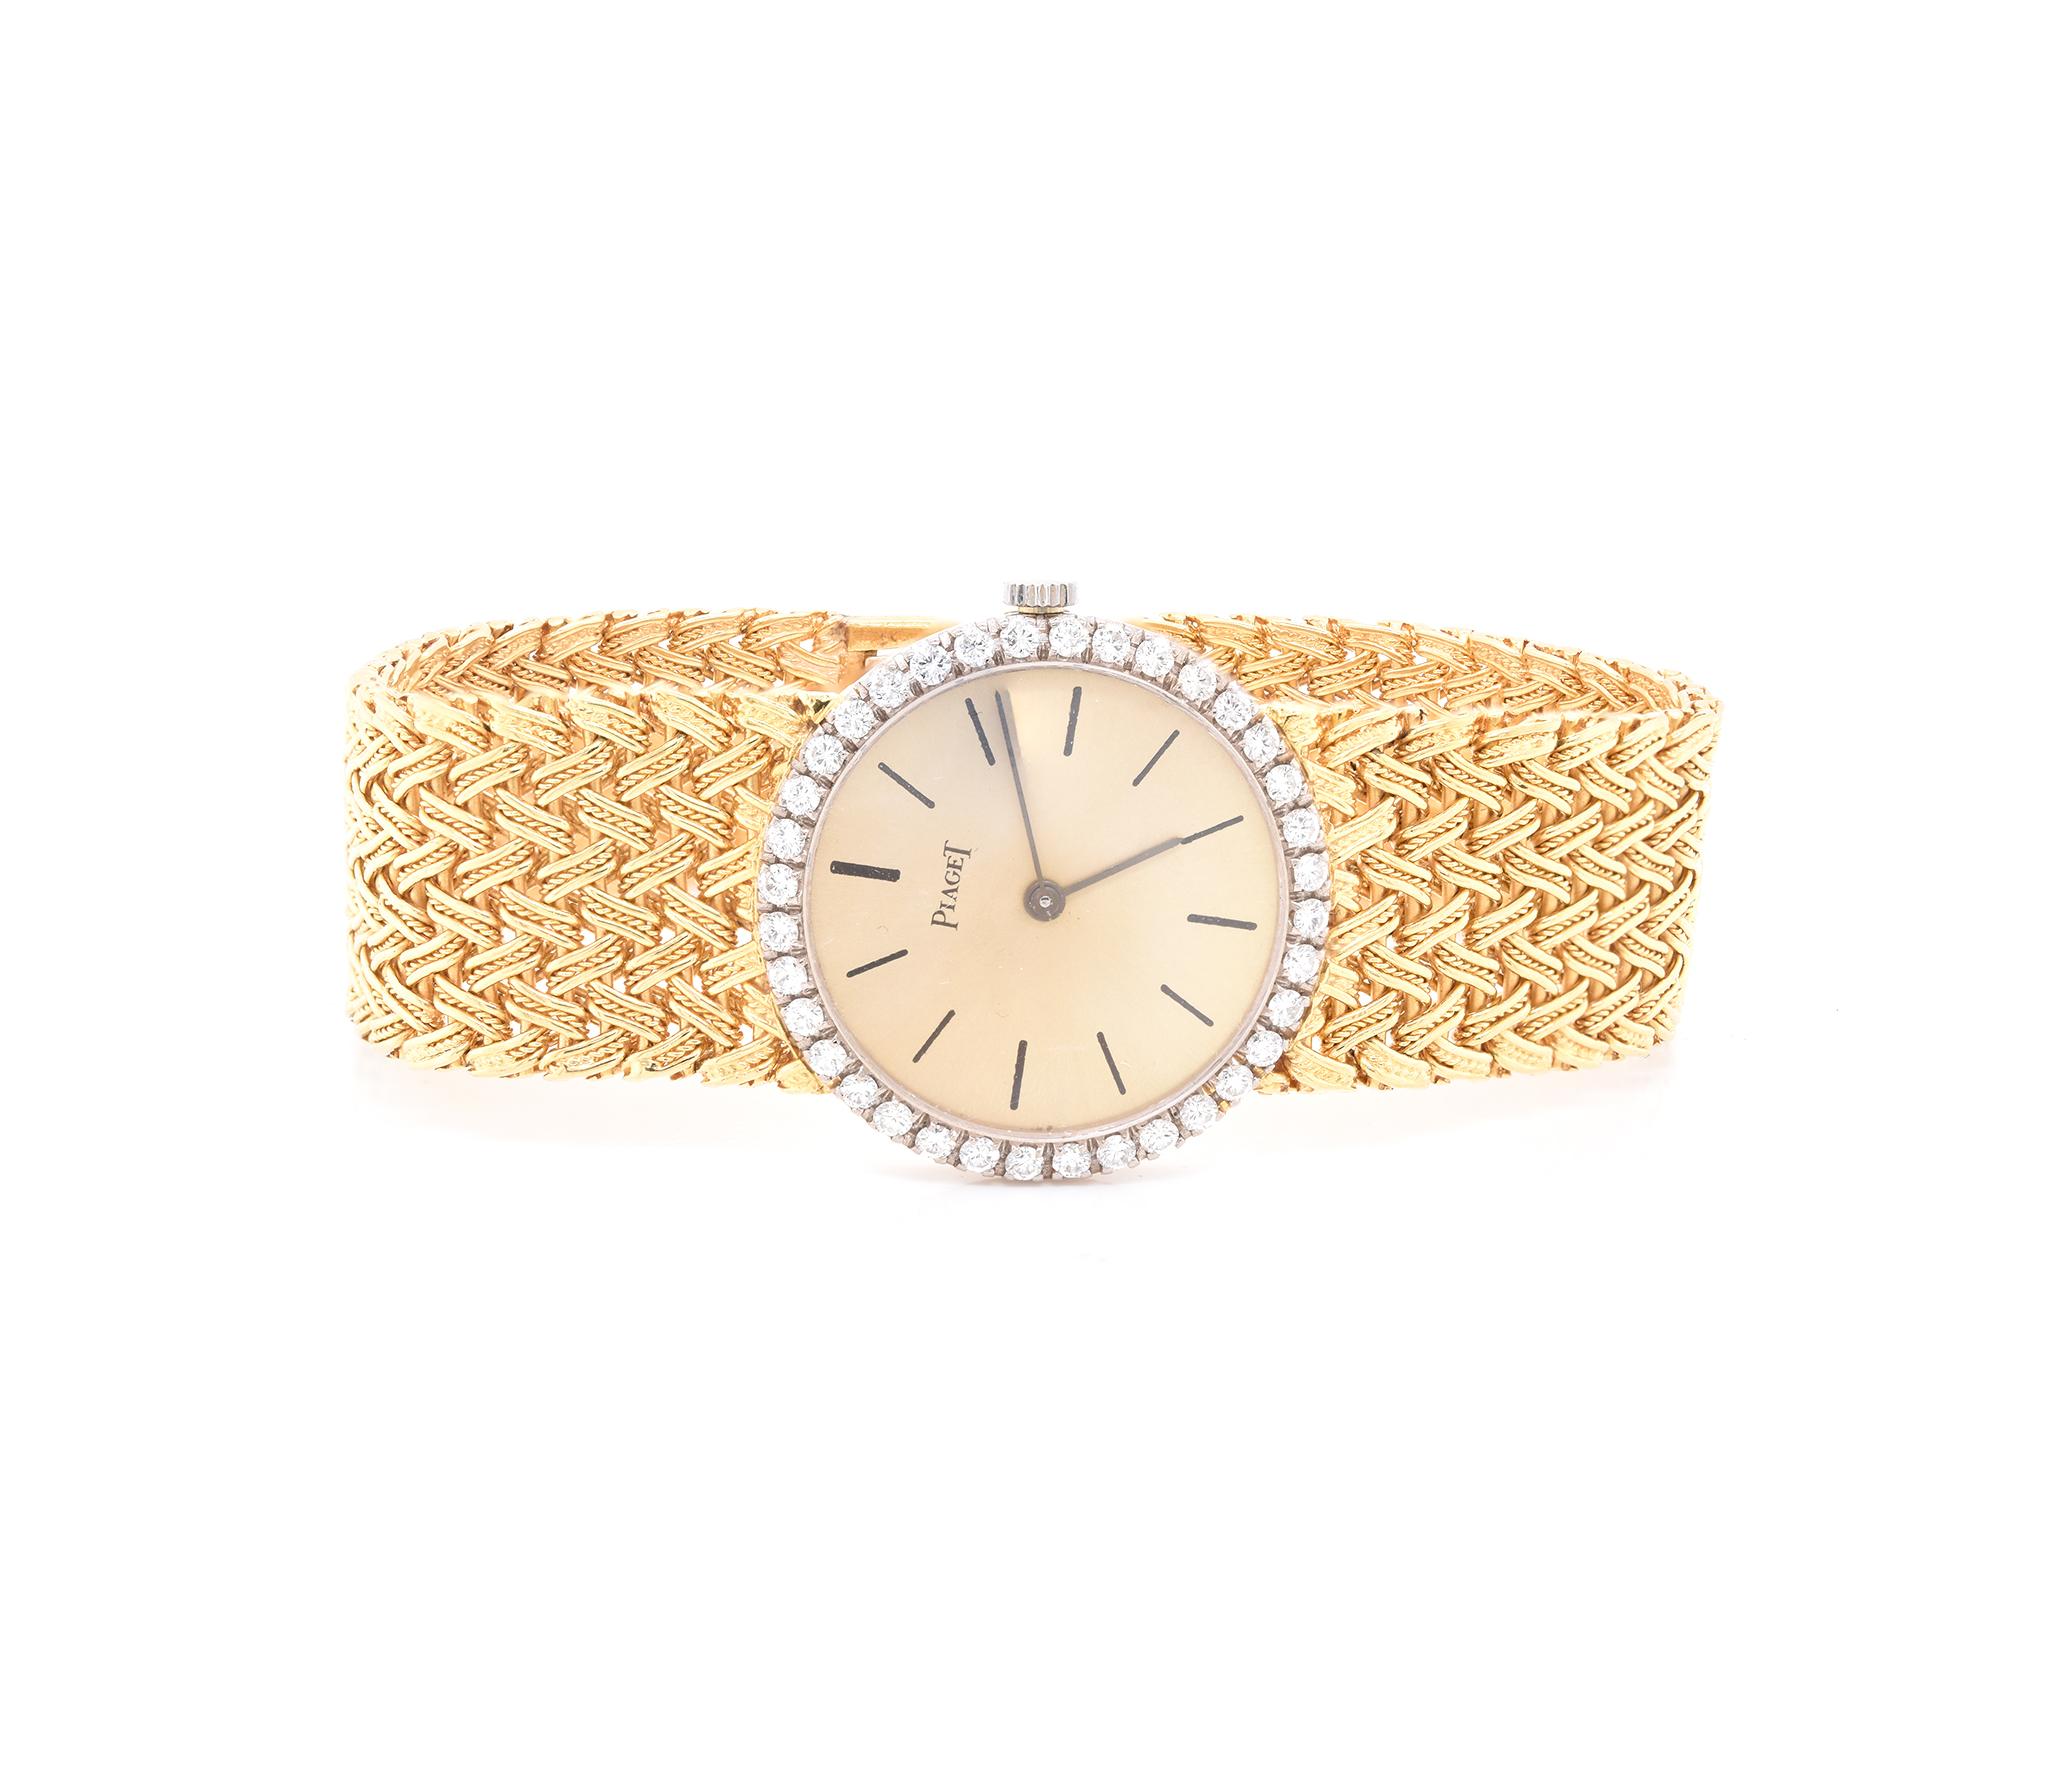 Movement: quartz
Function: hours, minutes
Case: 24mm yellow gold round case, scratch-resistant sapphire crystal, push/pull crown
Band: yellow gold Piaget mesh link bracelet with butterfly clasp
Dial: champagne stick dial
Serial: 101XXX
Diamonds: